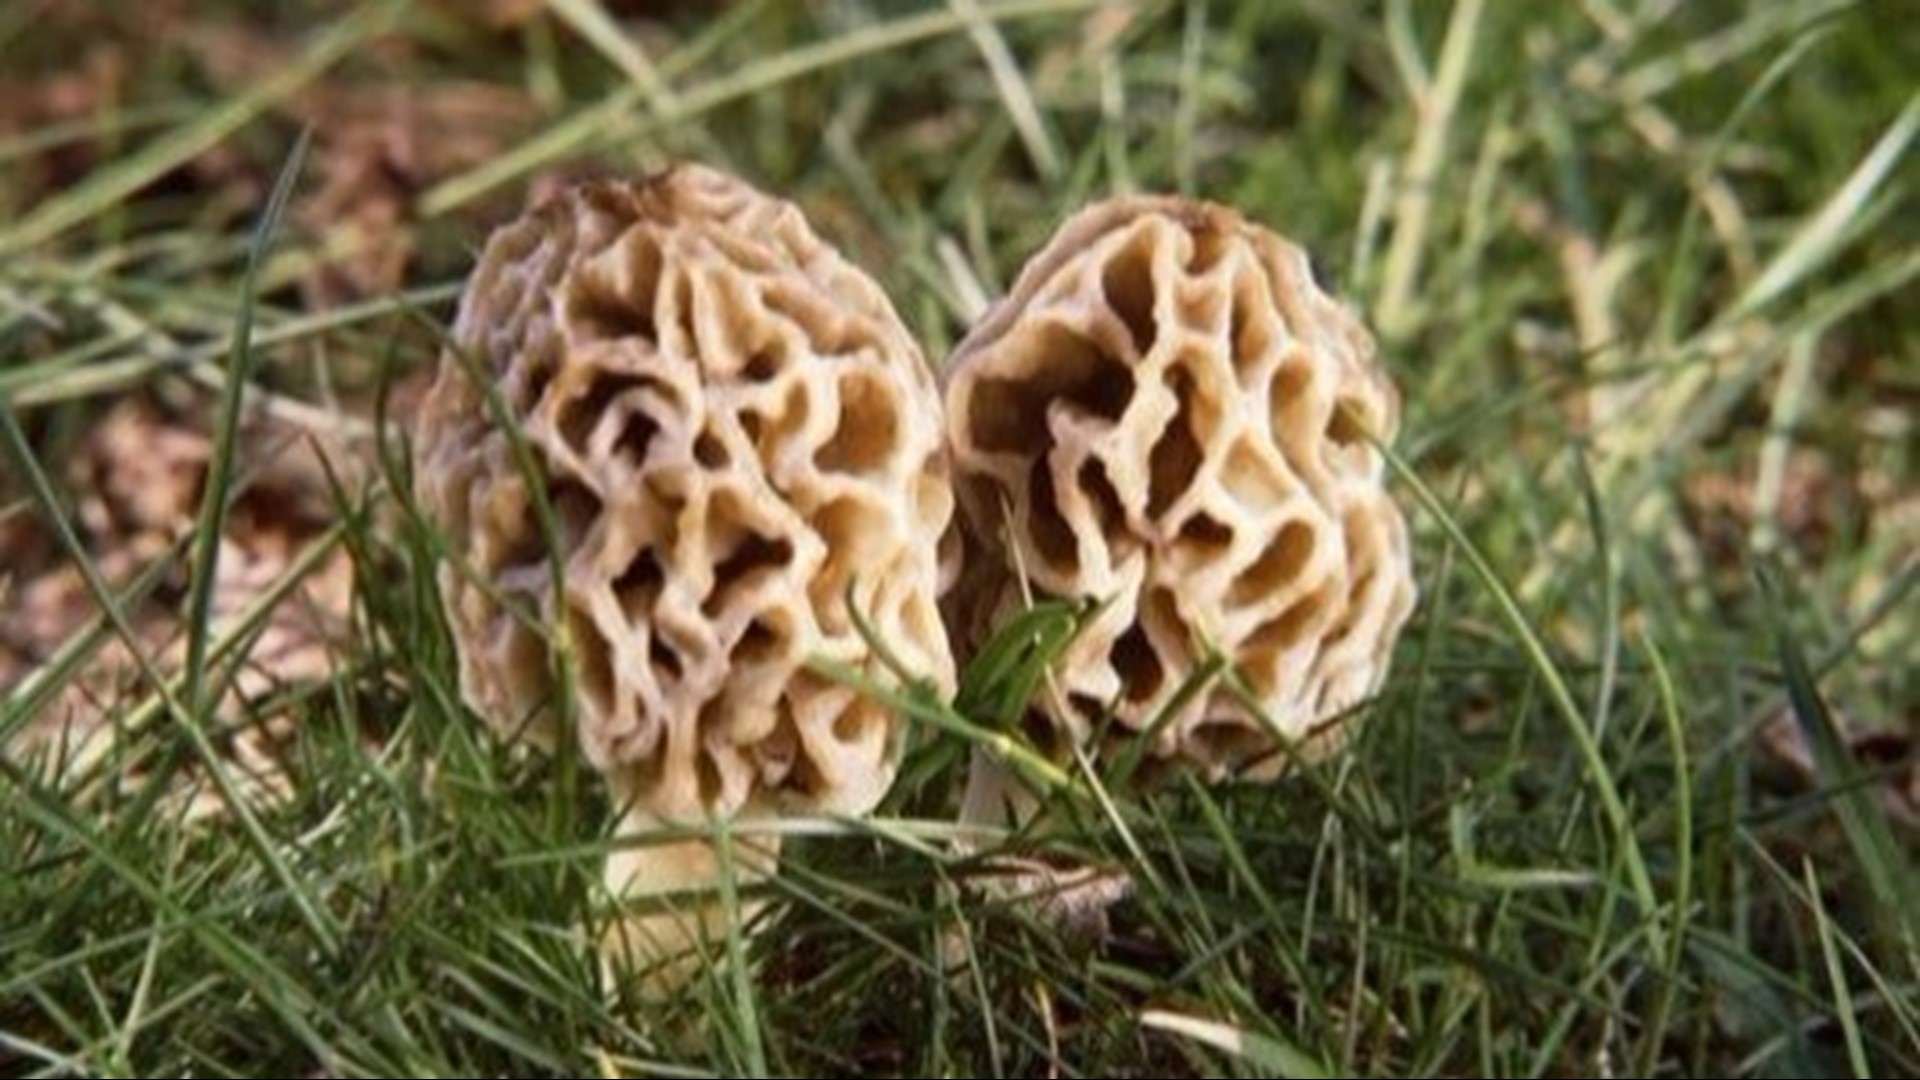 Get up and get out! 13 ON YOUR SIDE Meteorologist Alana Nehring goes hunting for morel mushrooms. She heads to a wooded area in Rockford, Mich., with tips from a mushroom hunting expert.